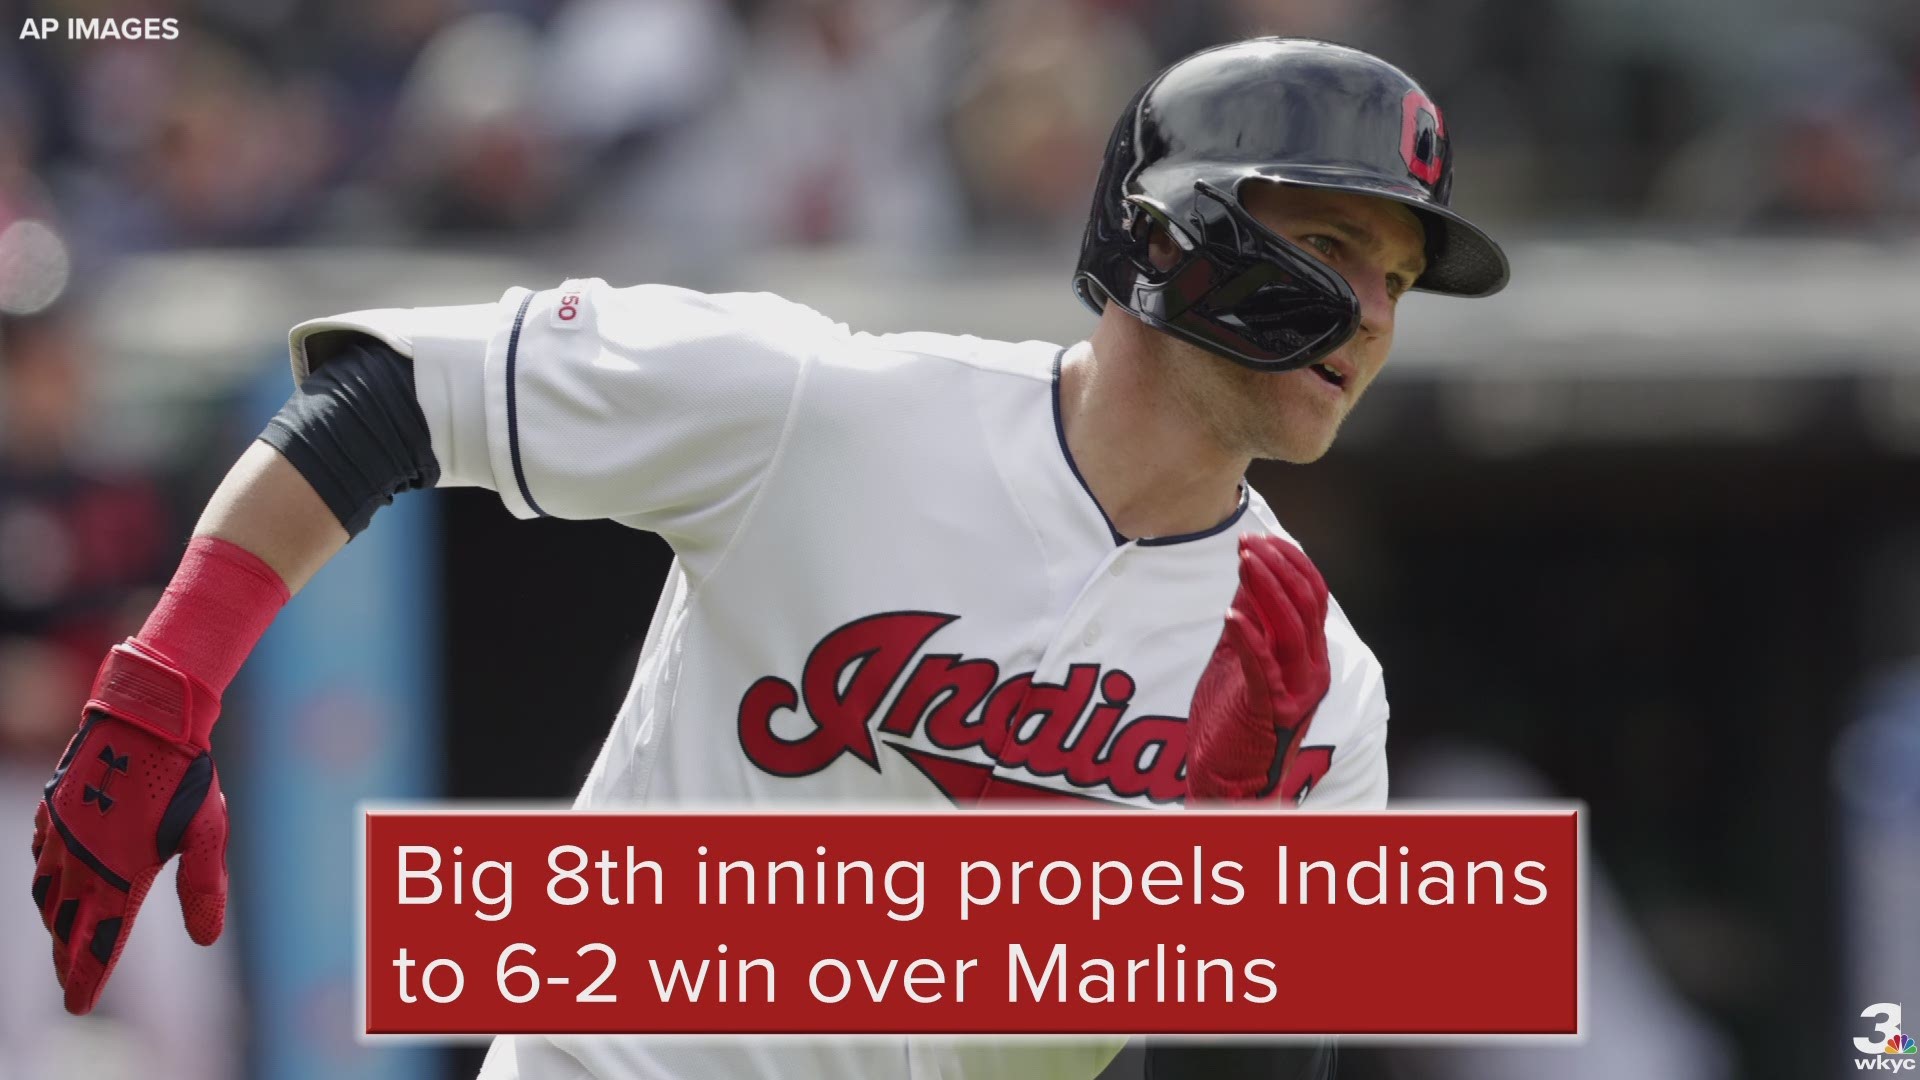 Jose Ramirez recorded 4 RBIs as the Cleveland Indians picked up a 6-2 win over the Miami Marlins.